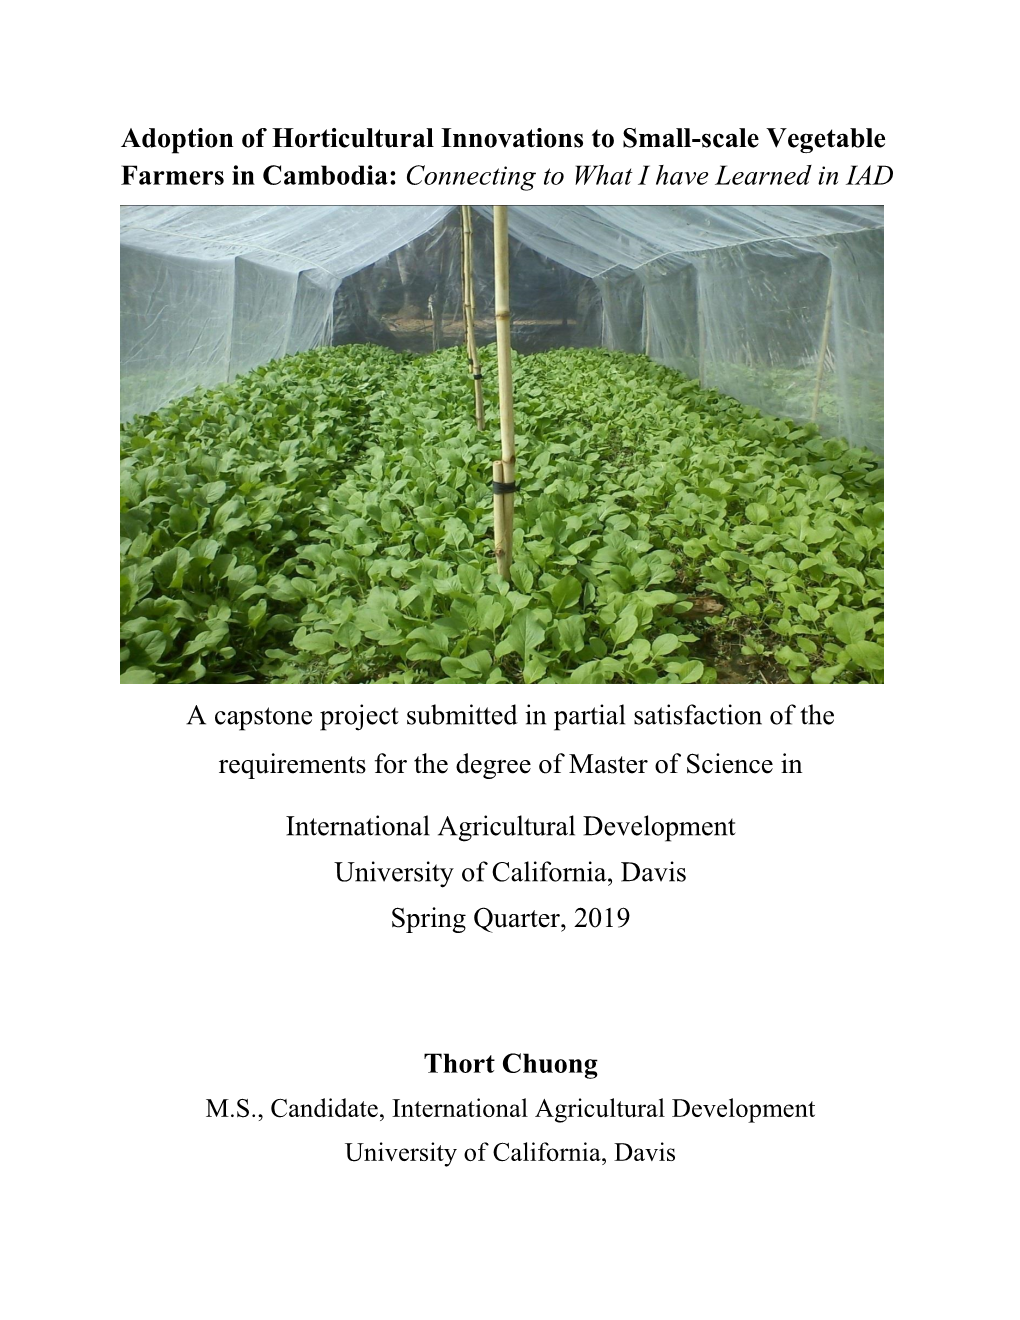 Adoption of Horticultural Innovations to Small-Scale Vegetable Farmers in Cambodia: Connecting to What I Have Learned in IAD